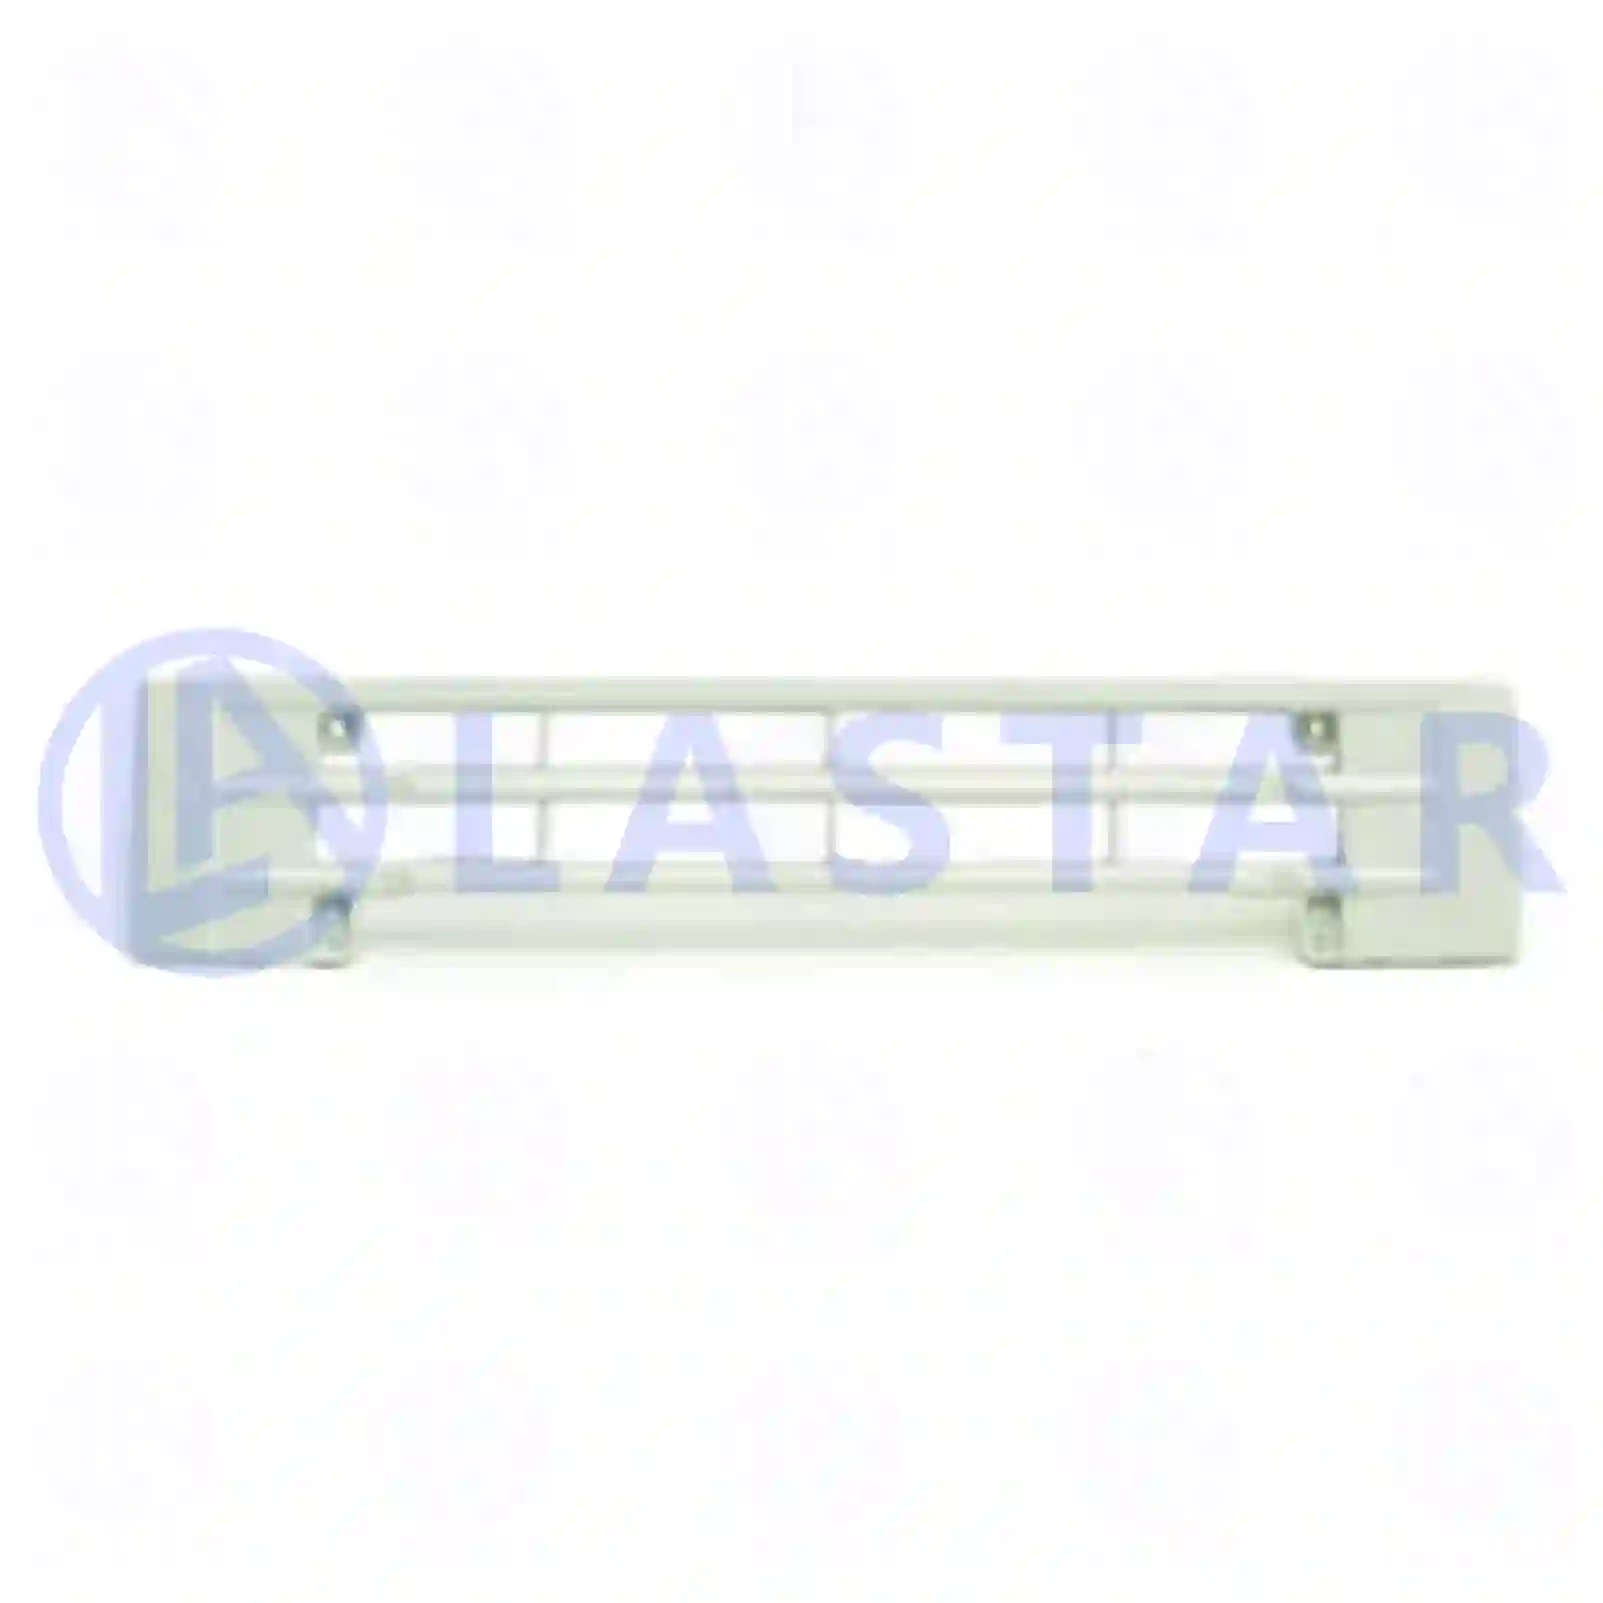 Front grill, 77721044, 1621181 ||  77721044 Lastar Spare Part | Truck Spare Parts, Auotomotive Spare Parts Front grill, 77721044, 1621181 ||  77721044 Lastar Spare Part | Truck Spare Parts, Auotomotive Spare Parts